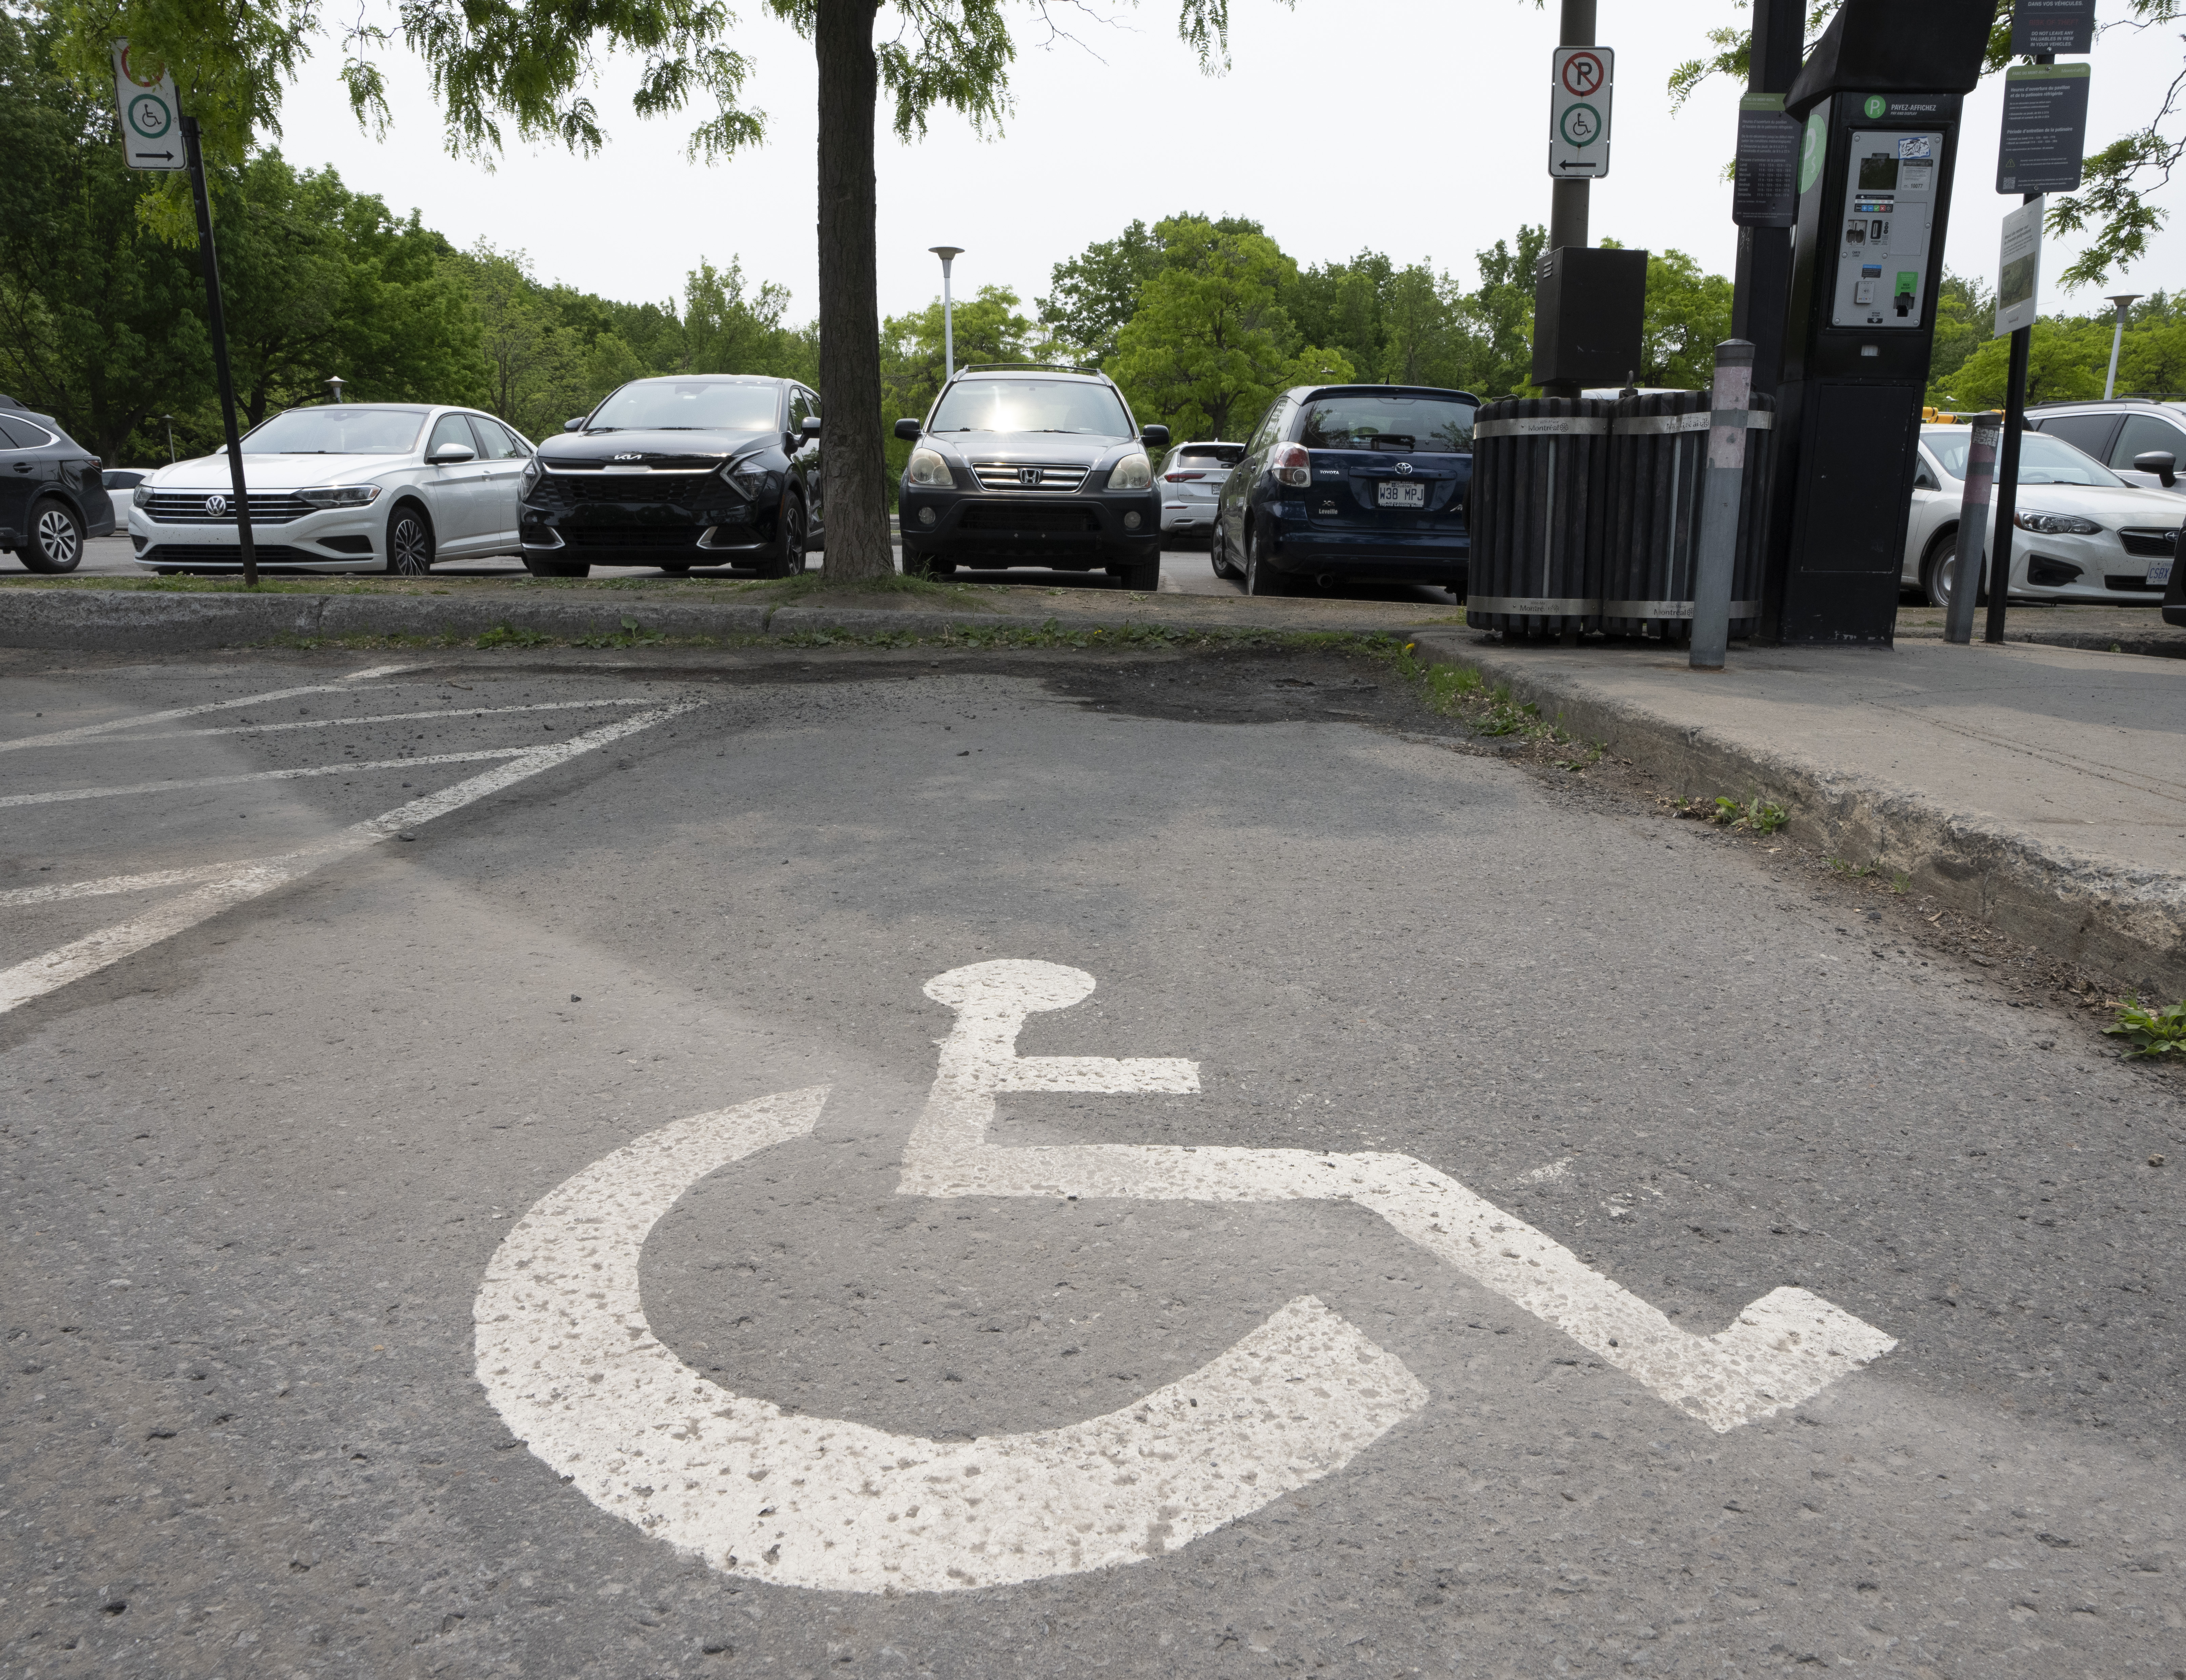 Quebecers living with disabilities voice concerns over new health reform